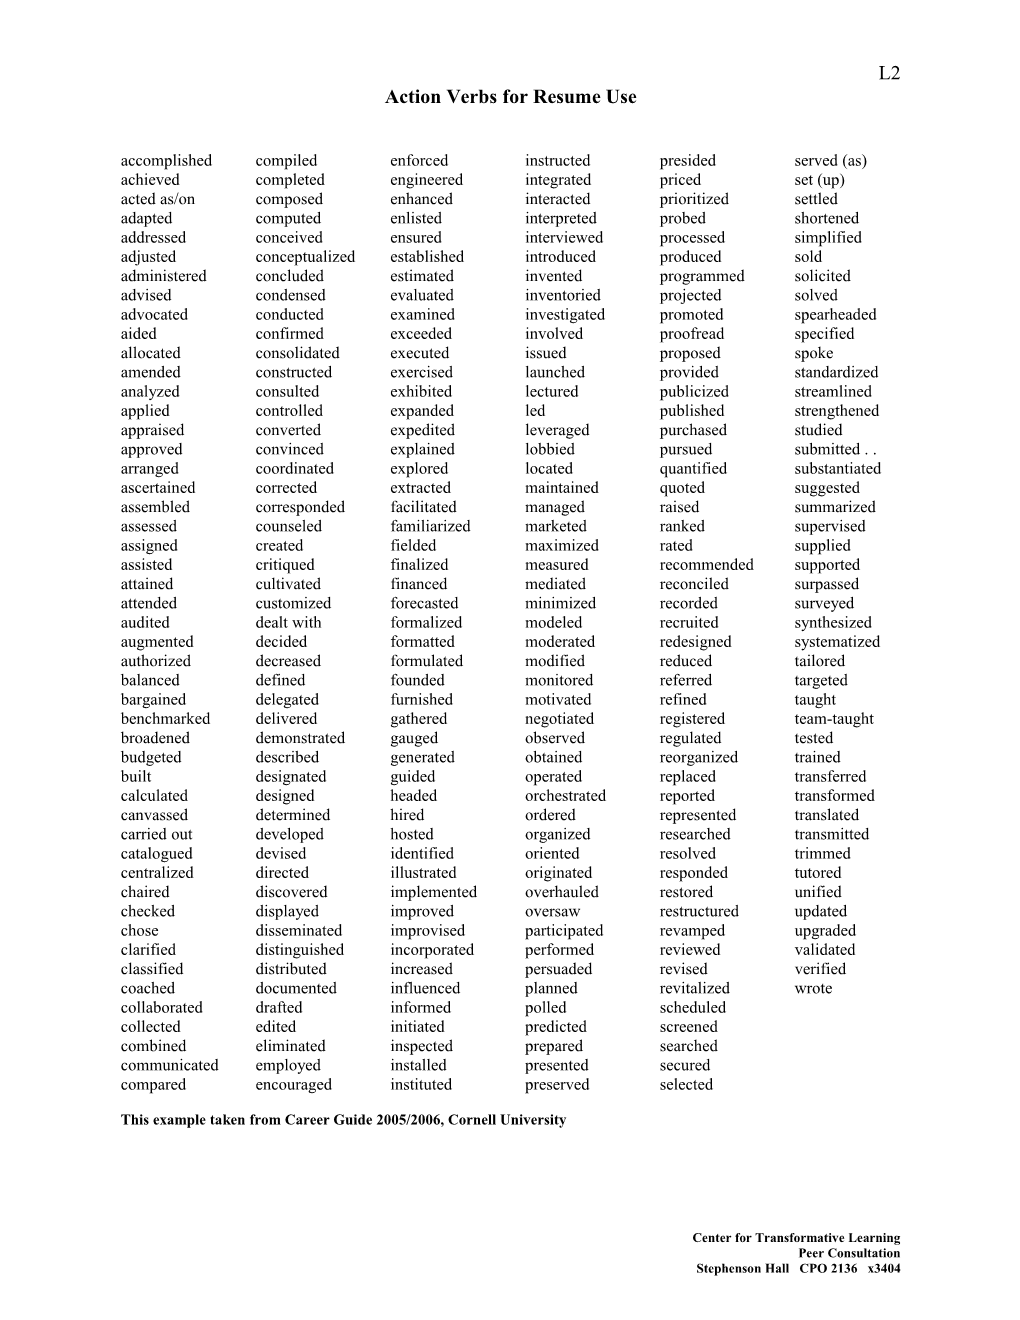 Action Verbs for Resume Use